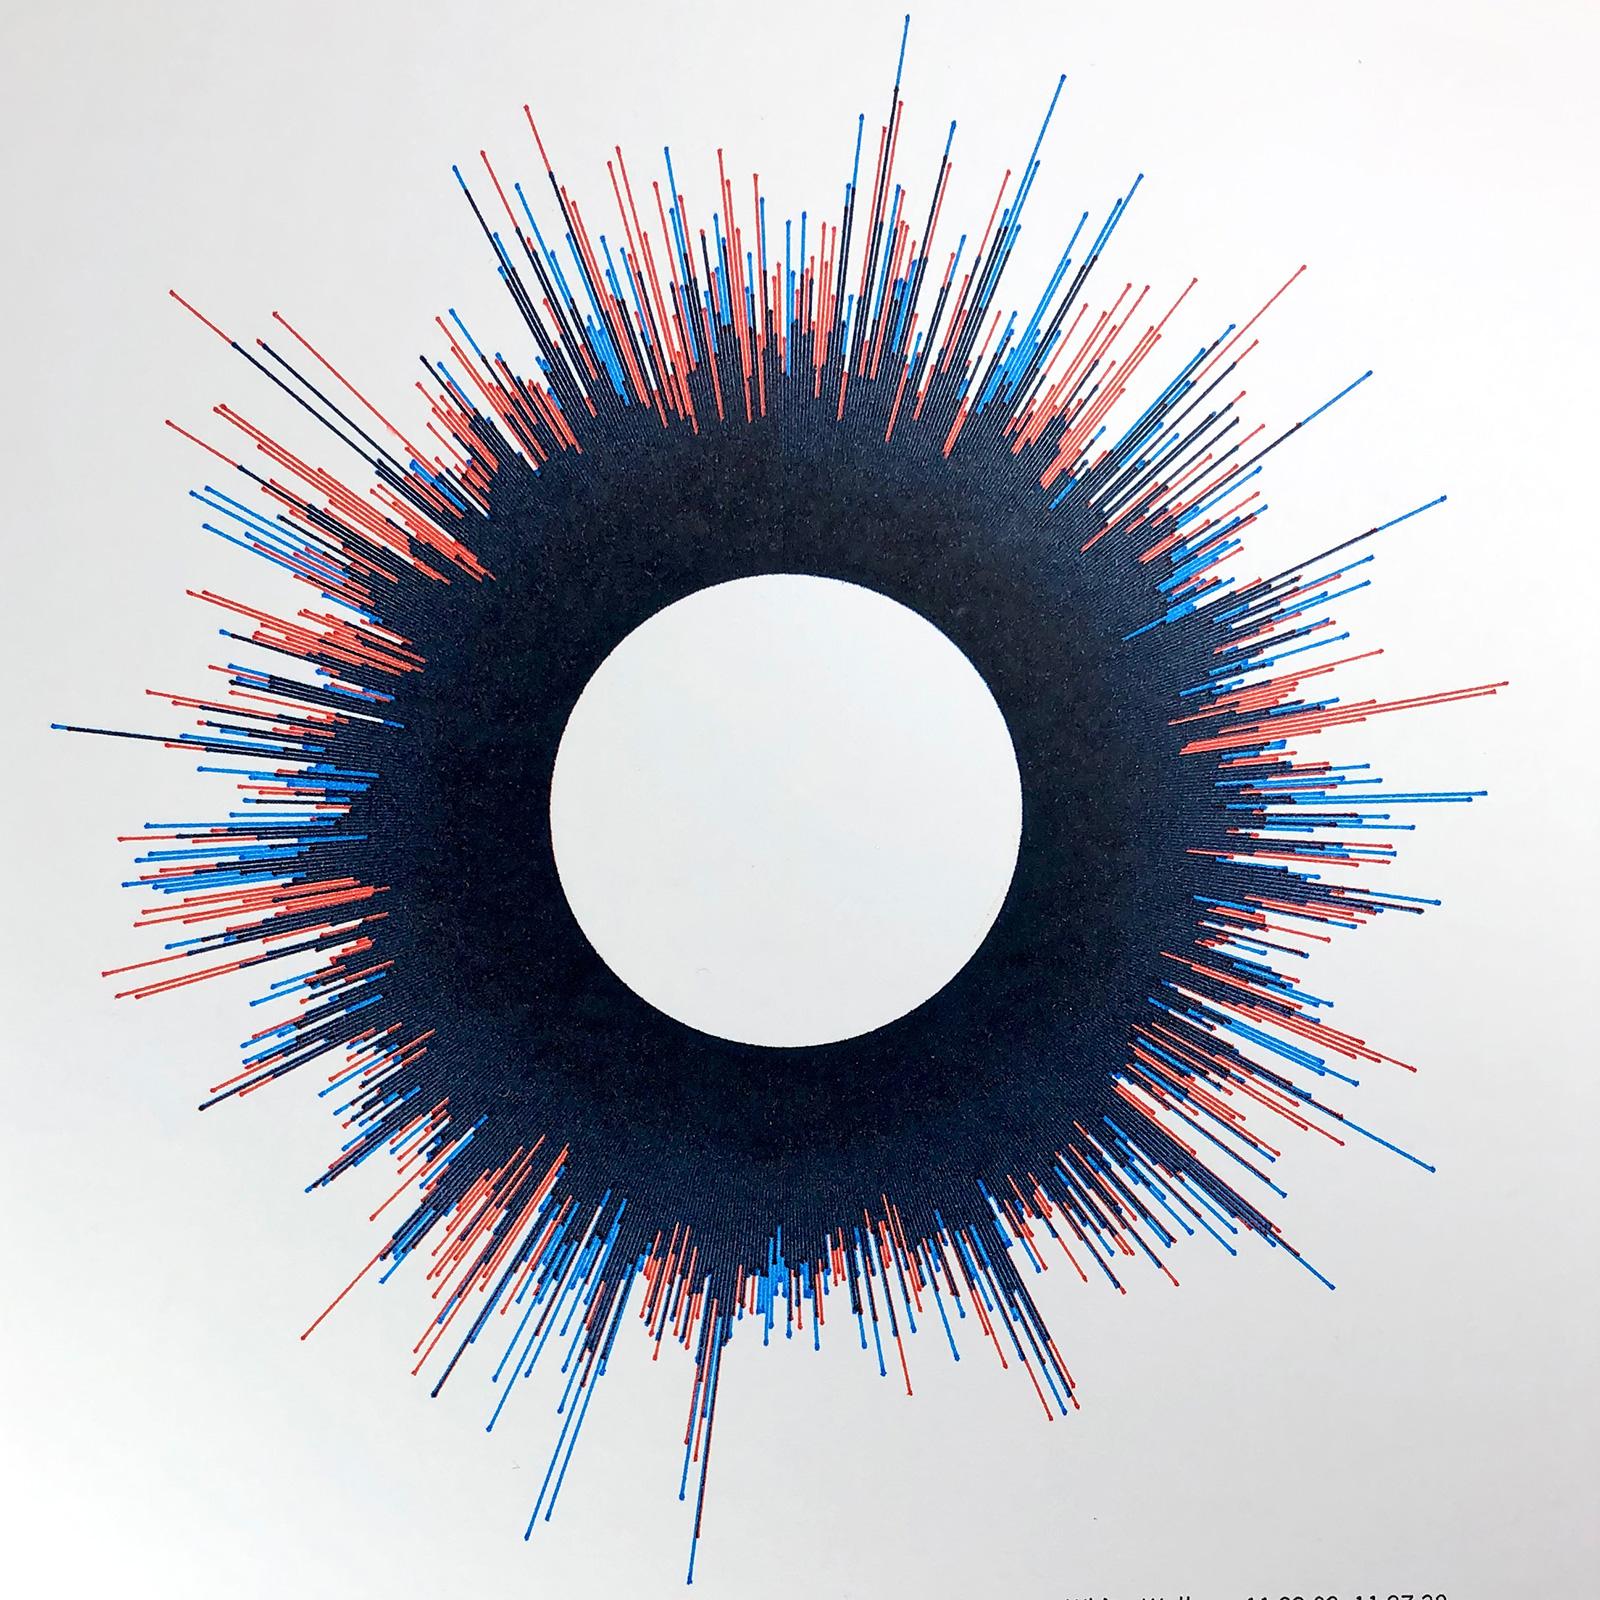 Overlapping tightly-packed red and blue lines leave the center of the page with seemingly random lengths. A white circle is cropped from the center